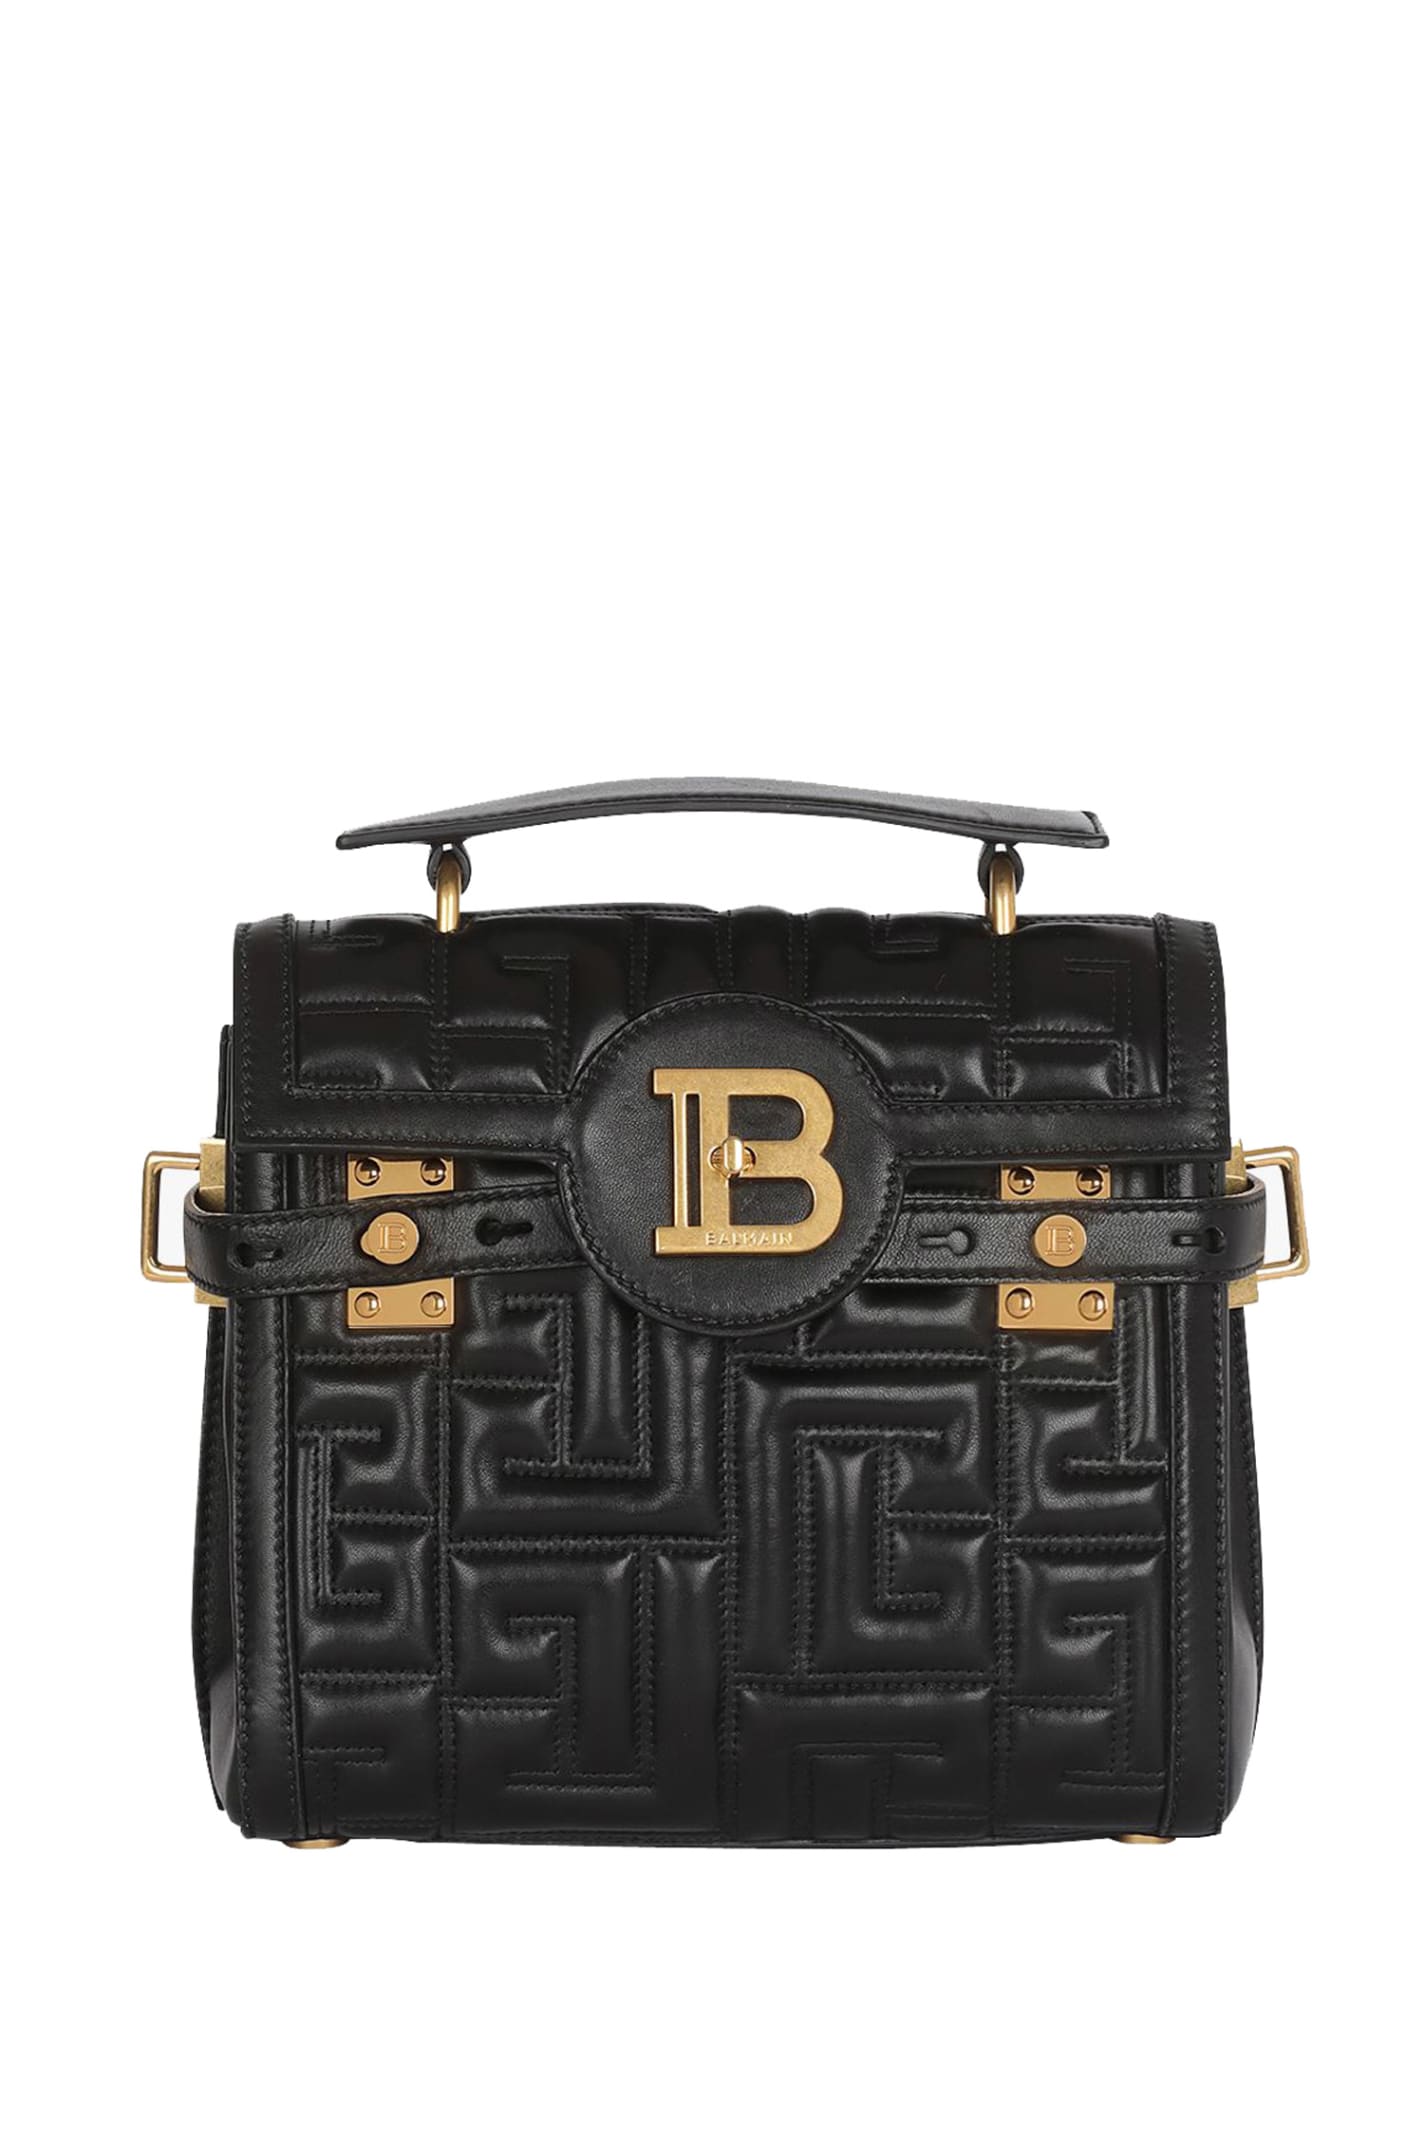 Balmain Black Quilted Leather B-buzz 23 Bag